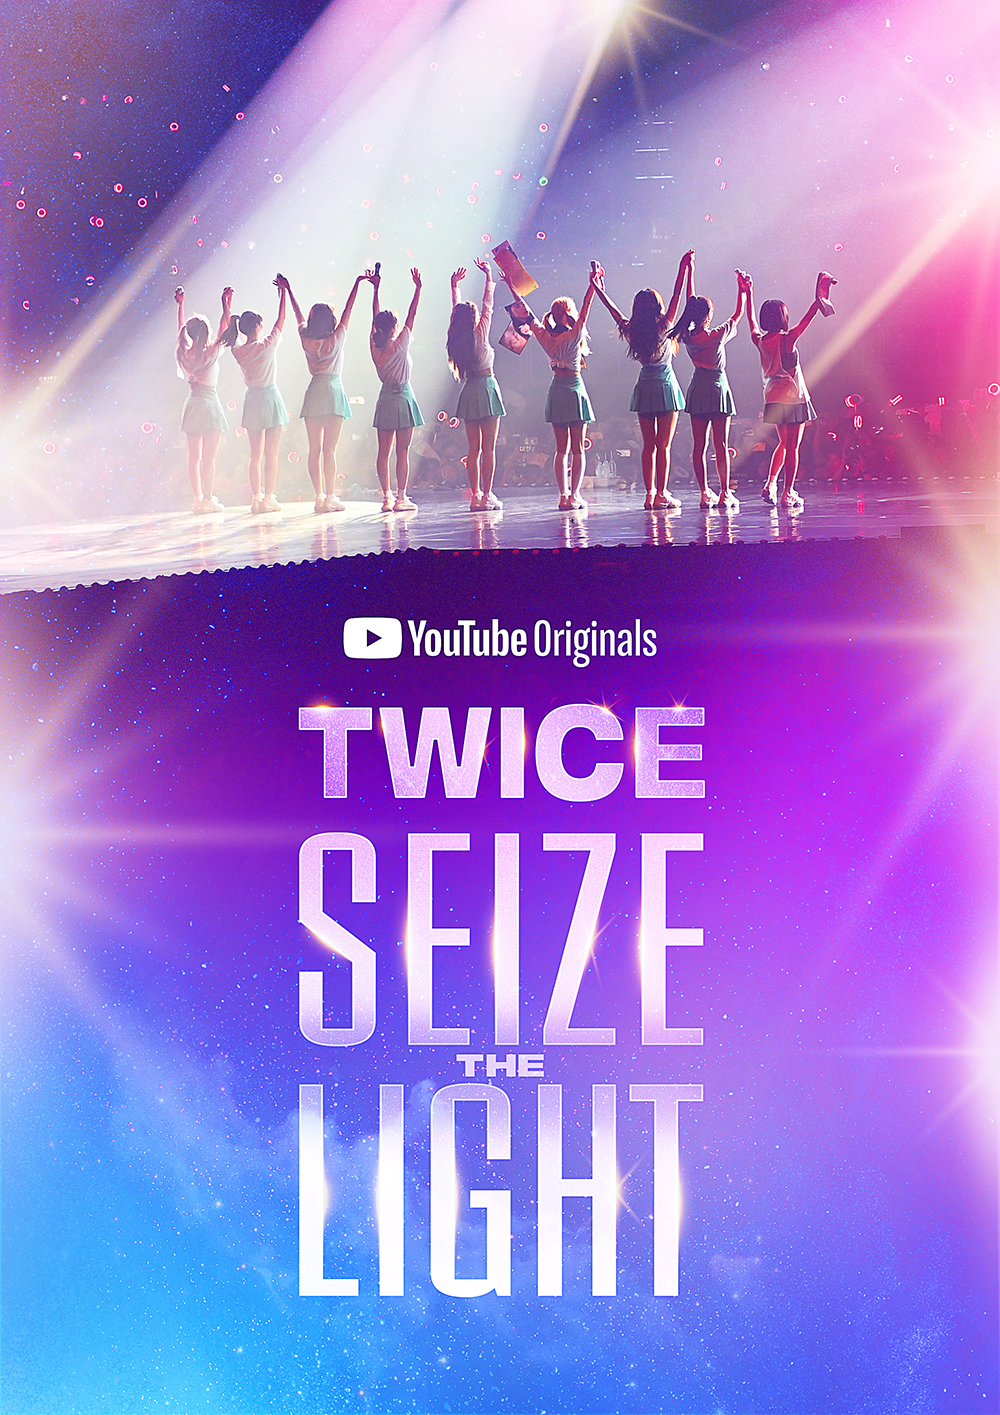 Herald Review] Twice's 'Seize the Lights' shows girl group as